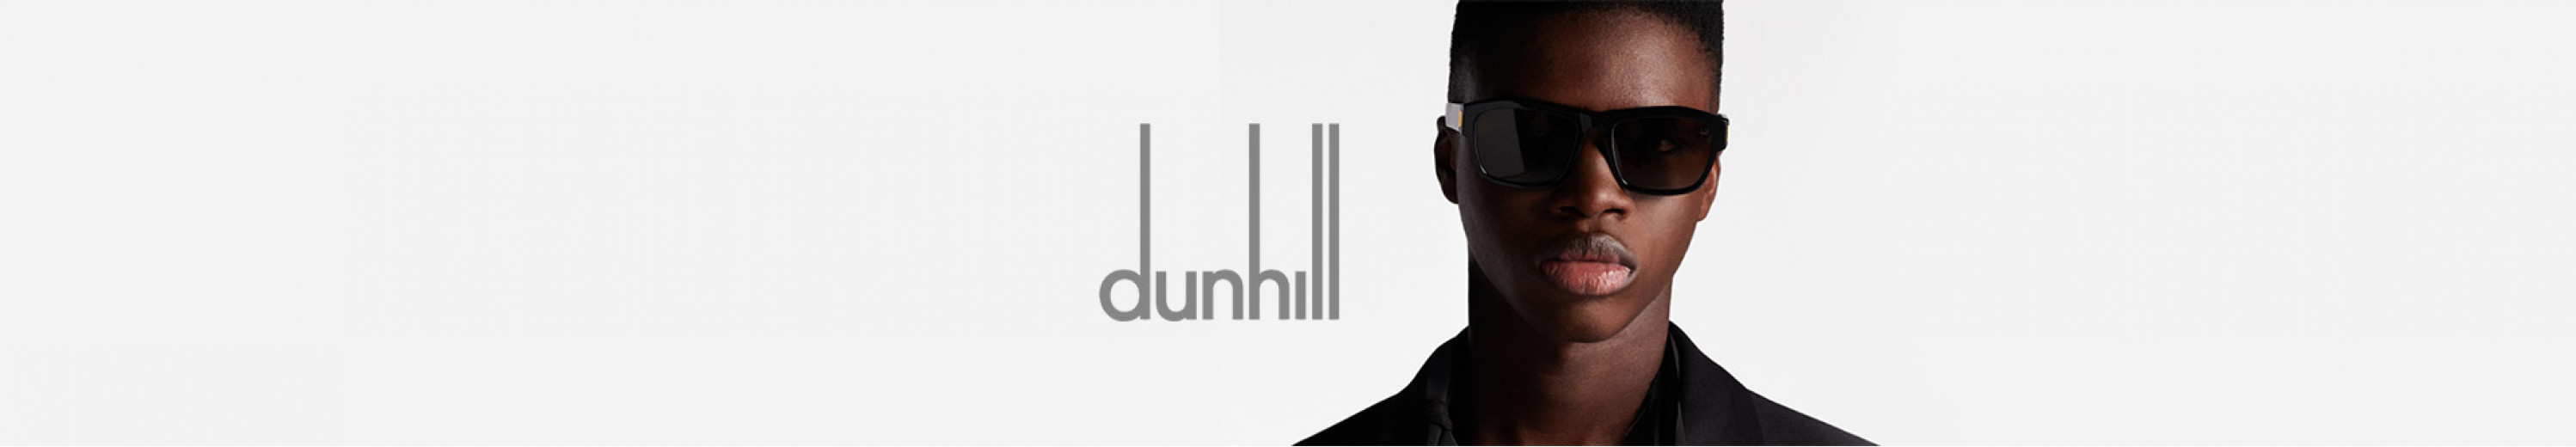 Dunhill Rollagas Eyewear Collection